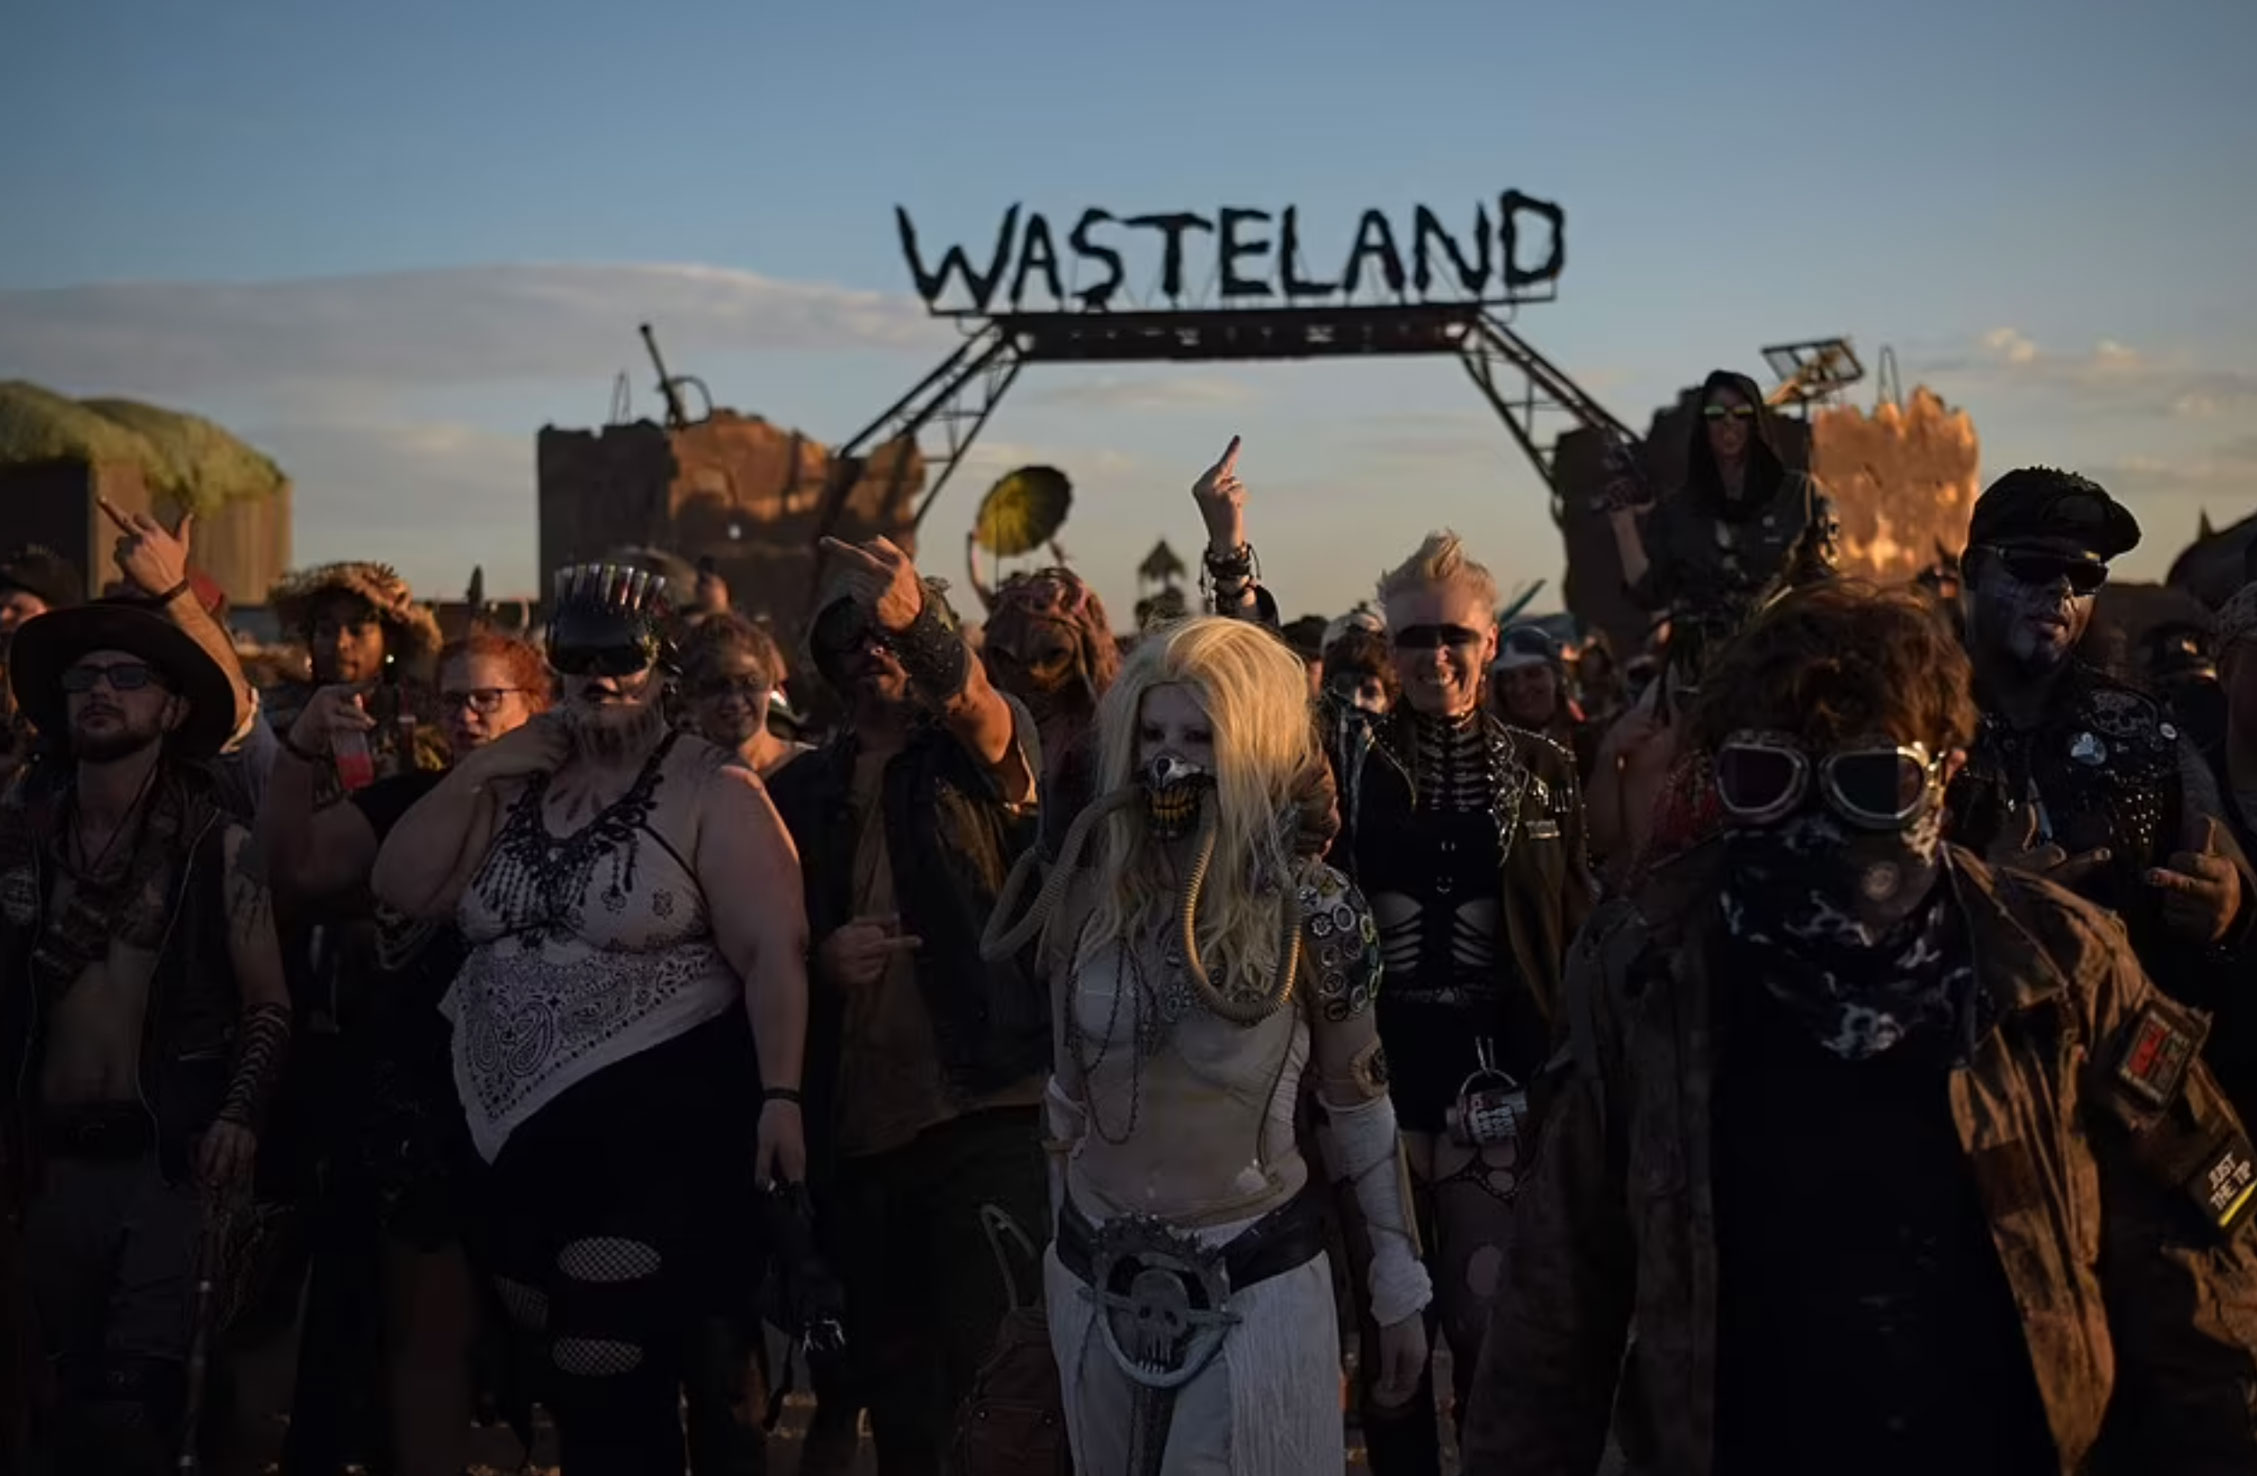 pictures from wasteland weekend - crowd - Wasteland or Isot Tett